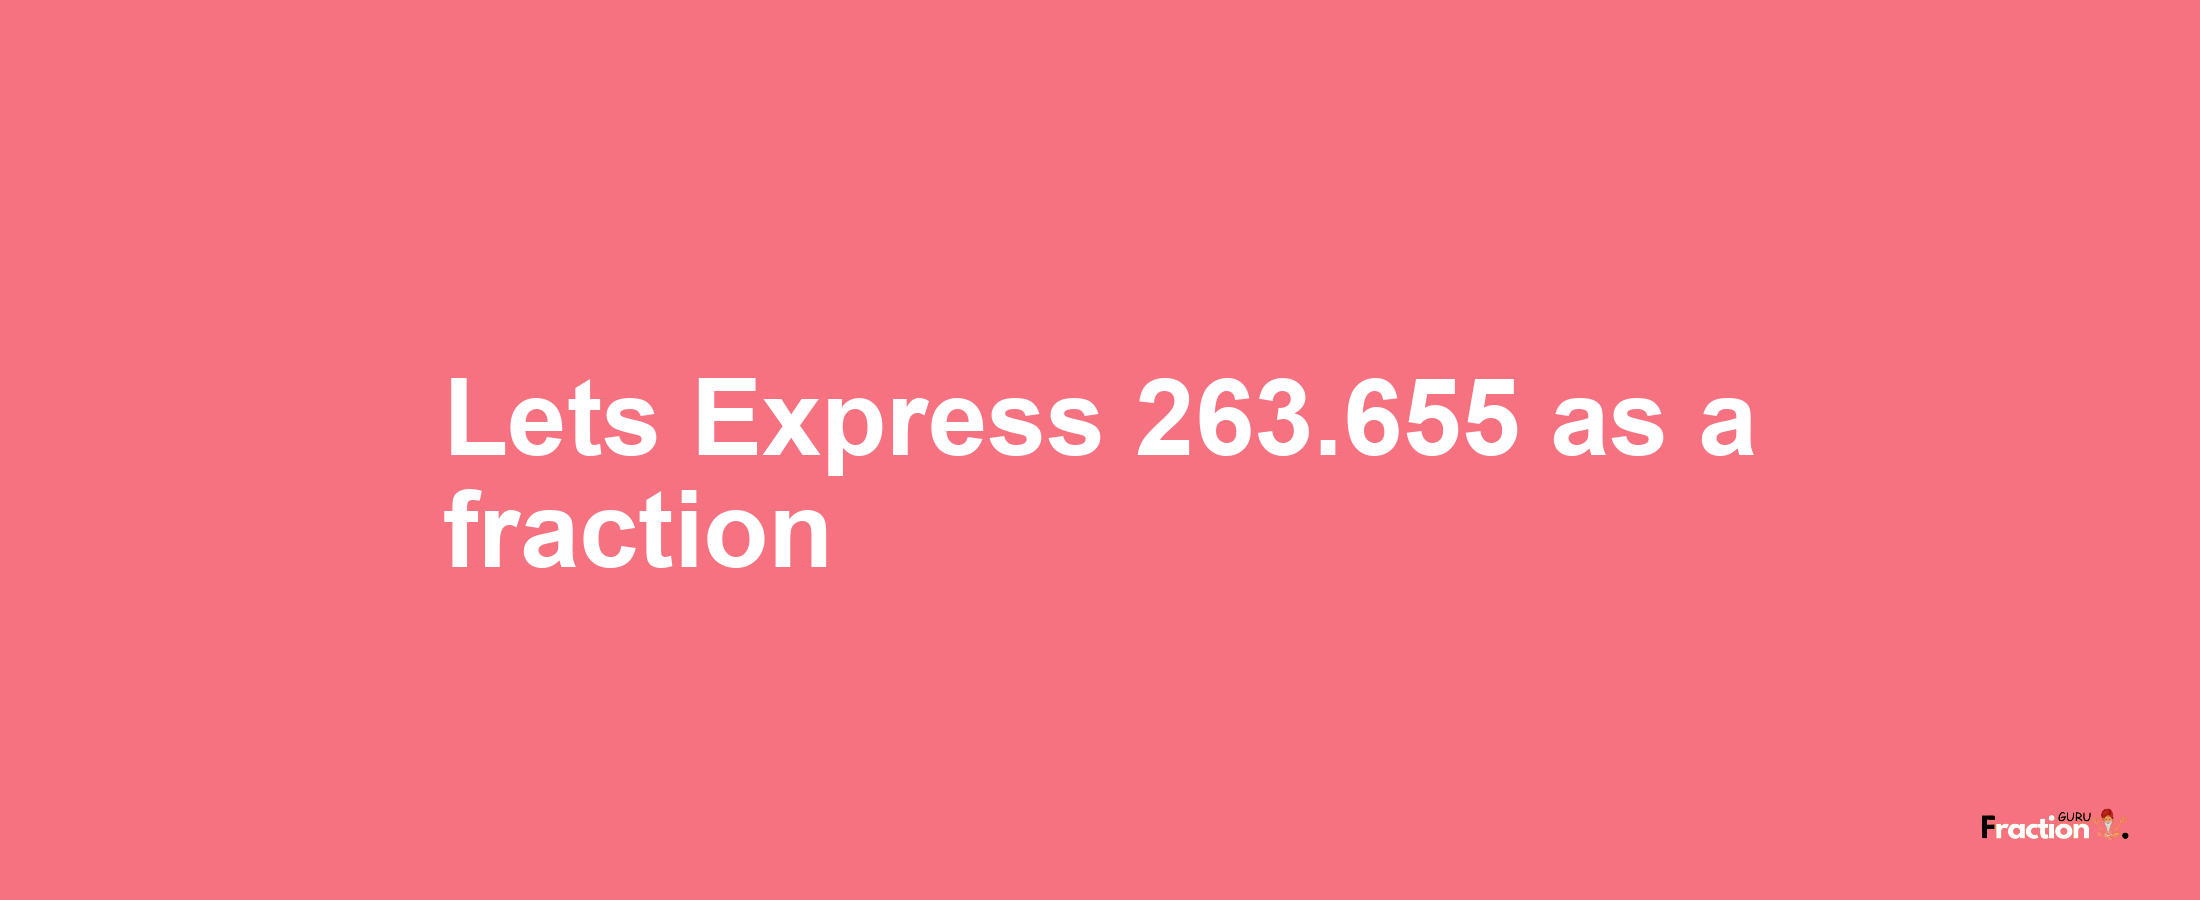 Lets Express 263.655 as afraction